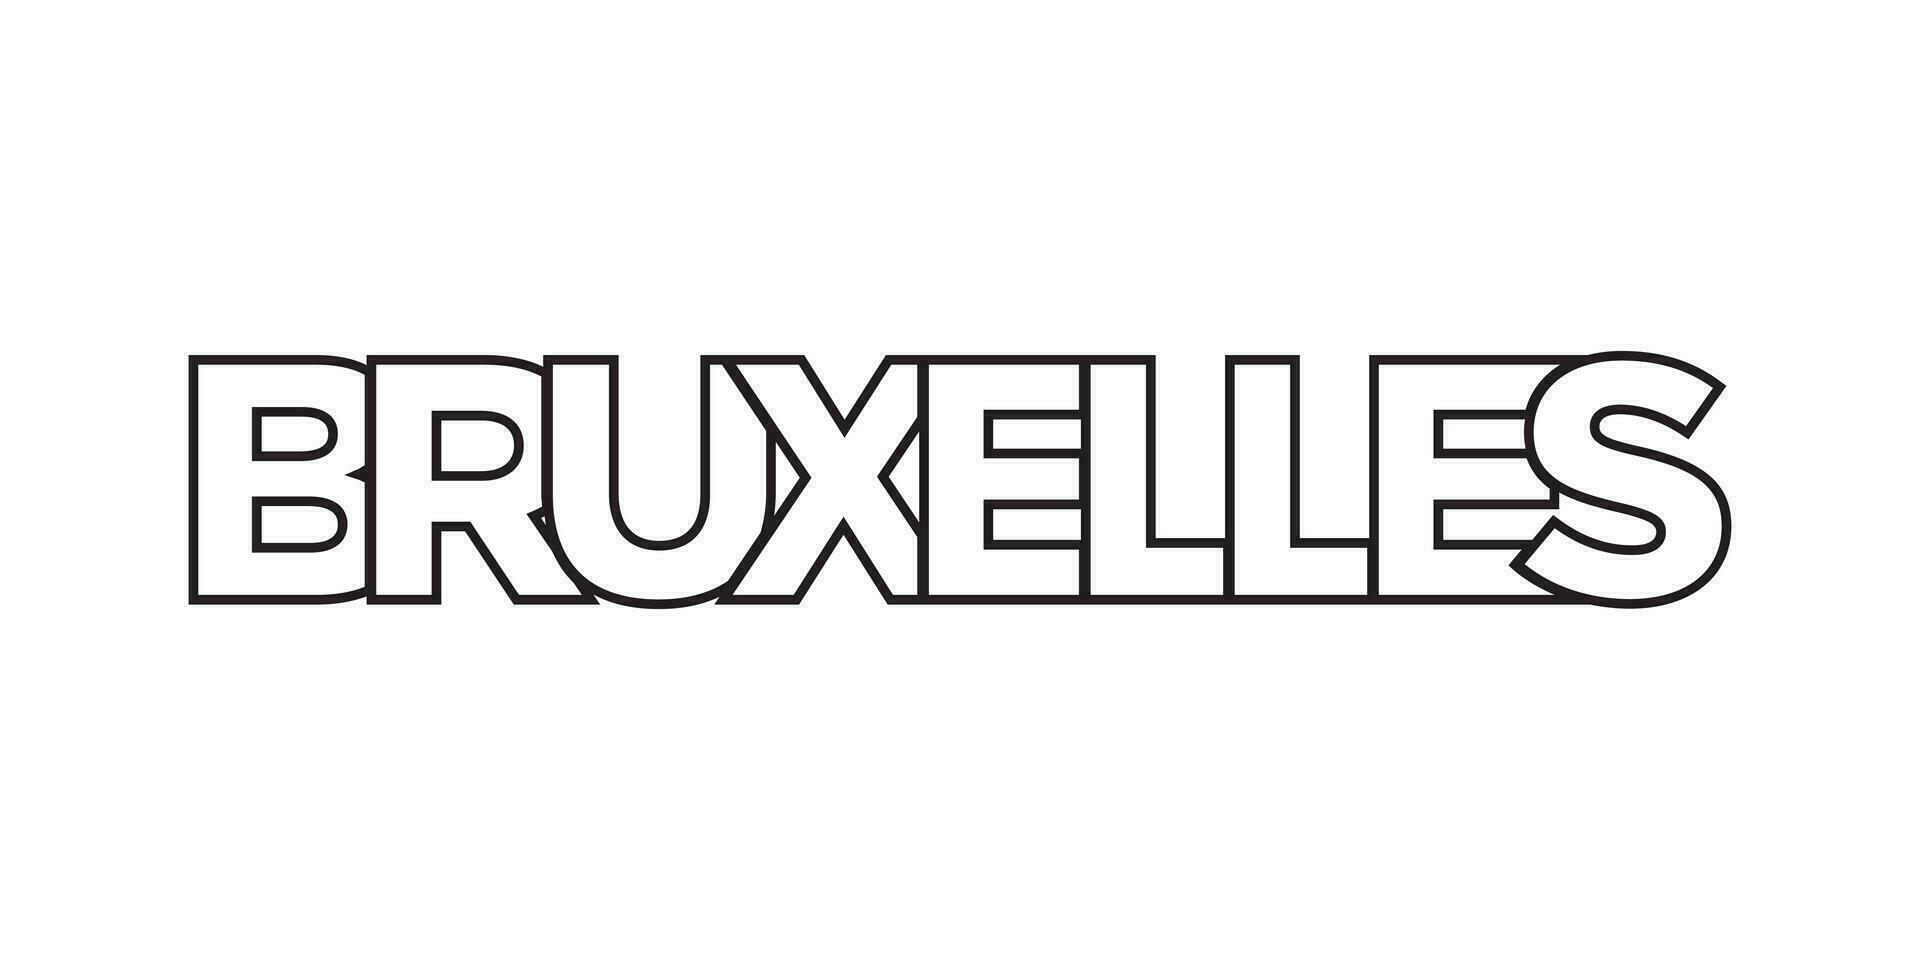 Bruxelles in the Belgium emblem. The design features a geometric style, vector illustration with bold typography in a modern font. The graphic slogan lettering.